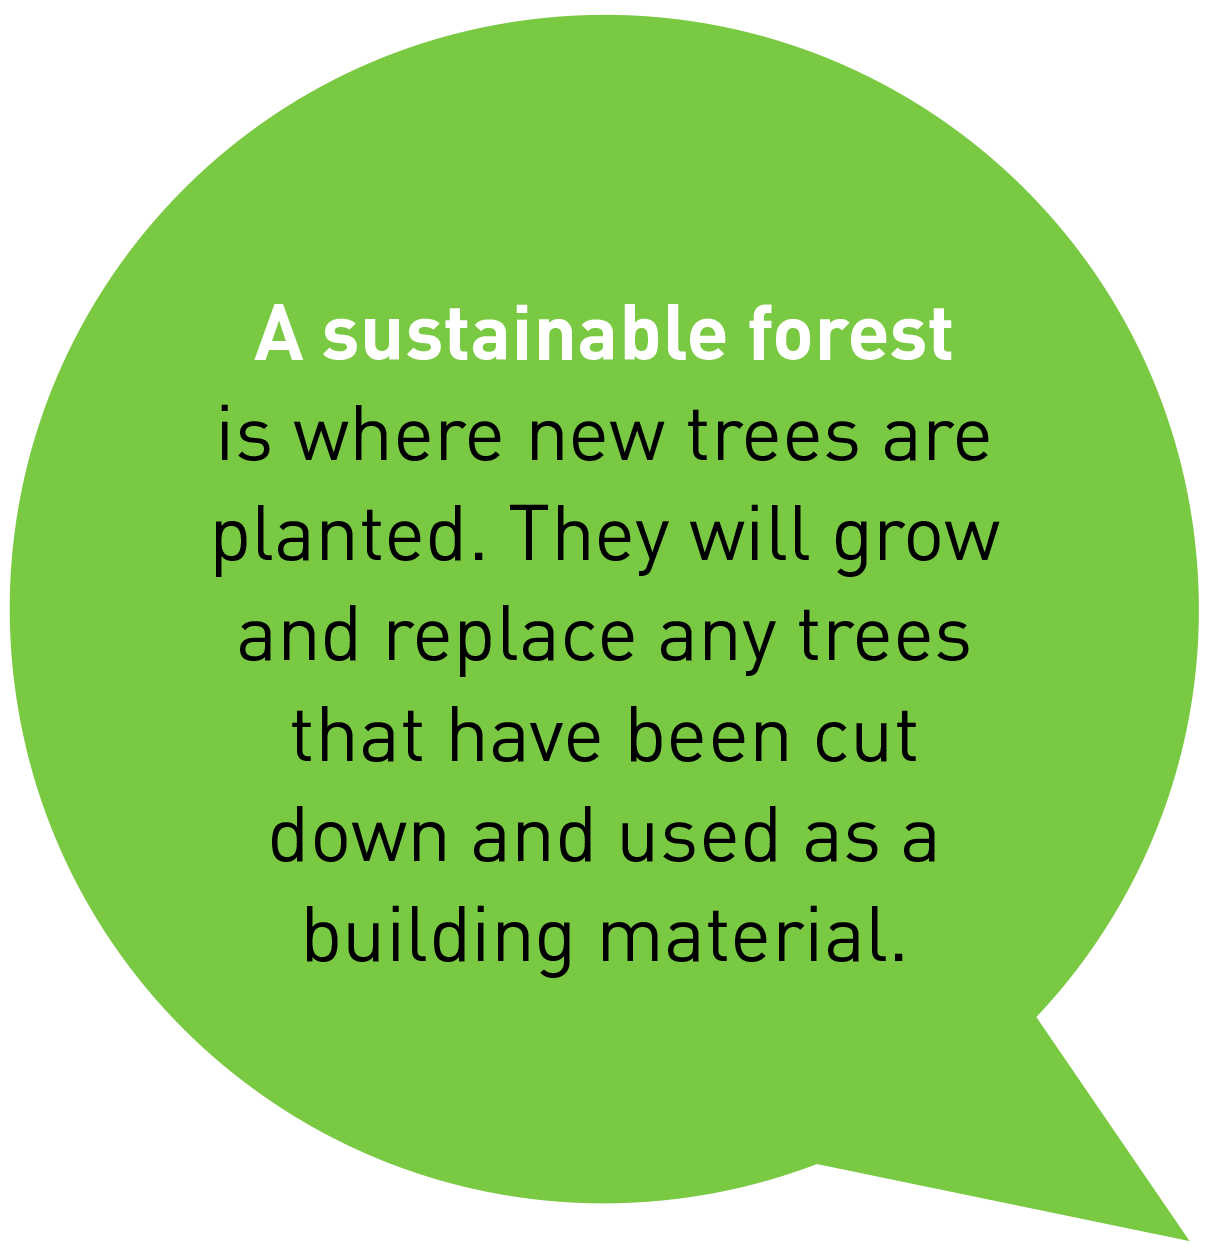 A sustainable forest